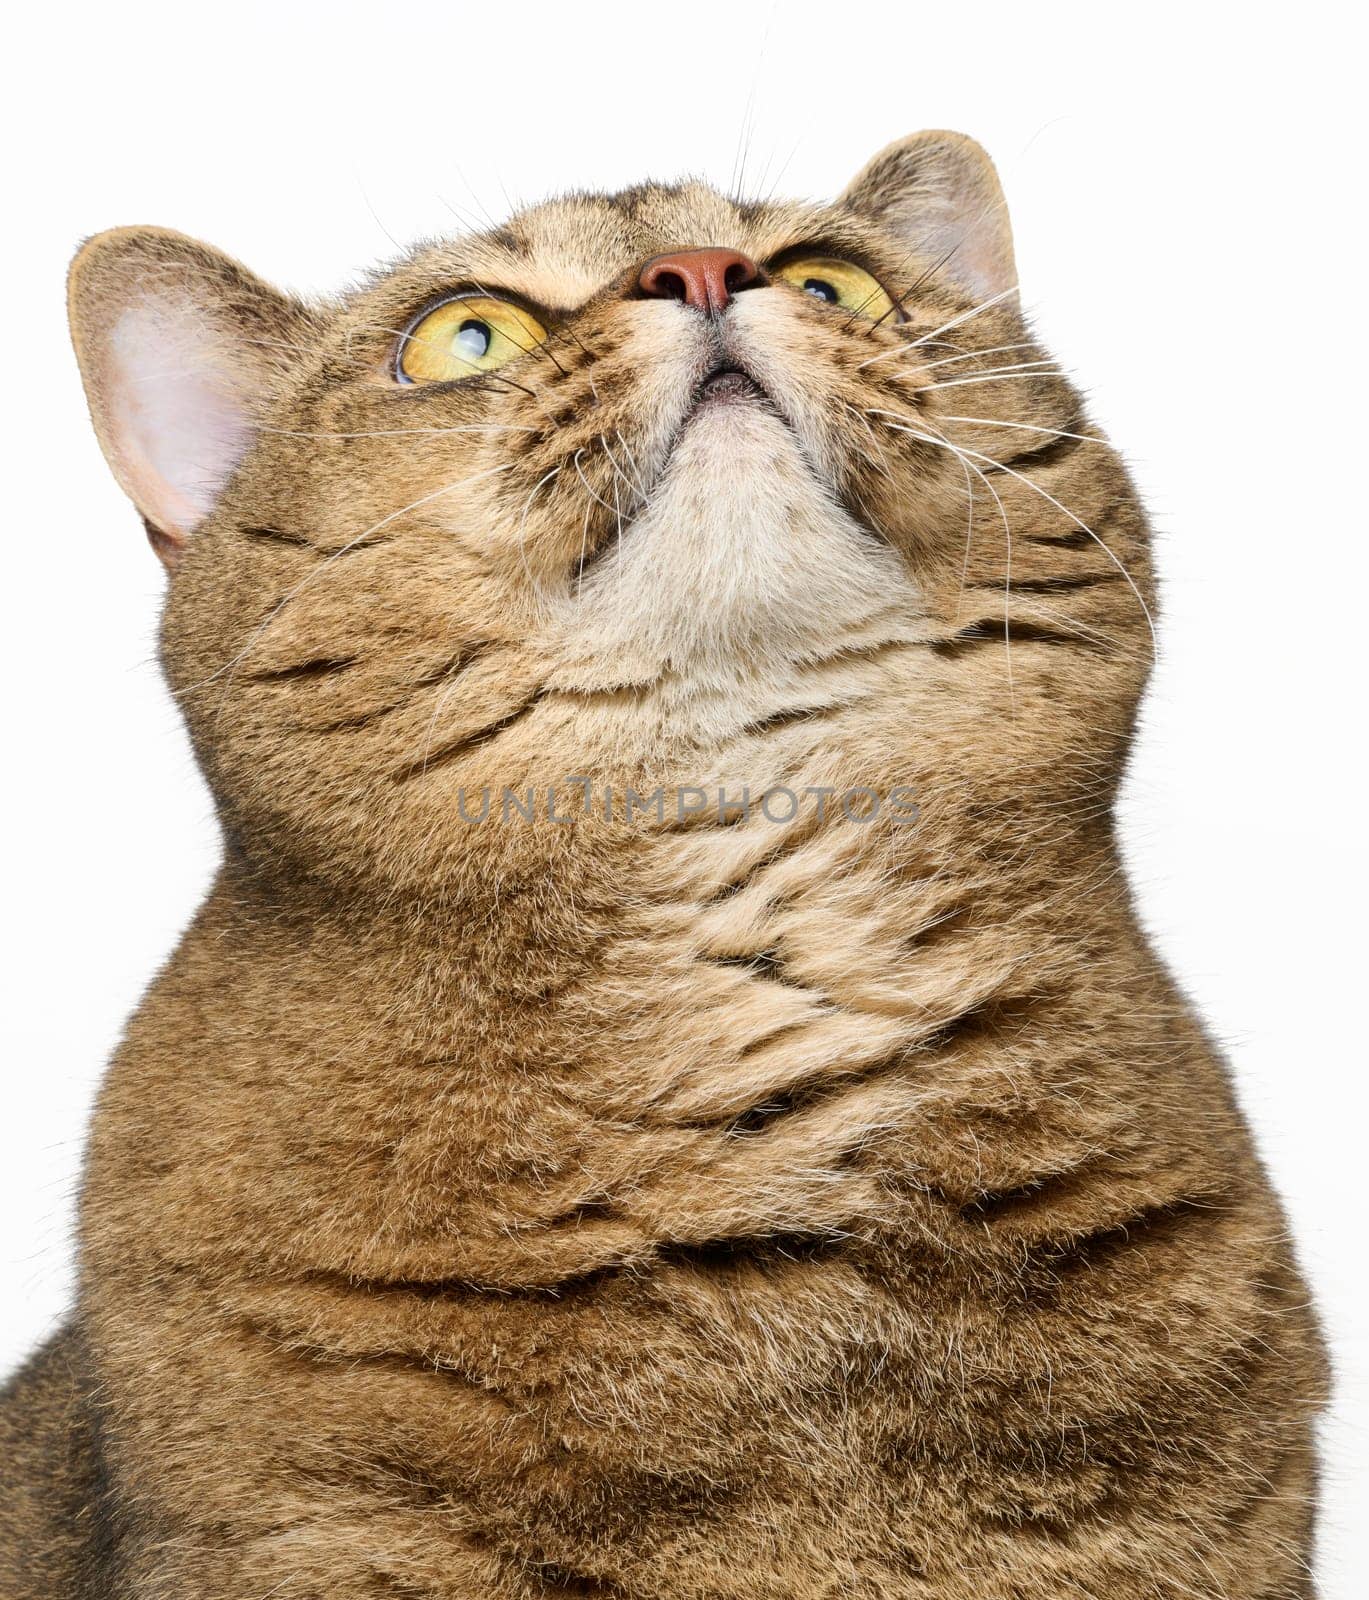 An adult gray cat sits on a white background, a funny face looks up